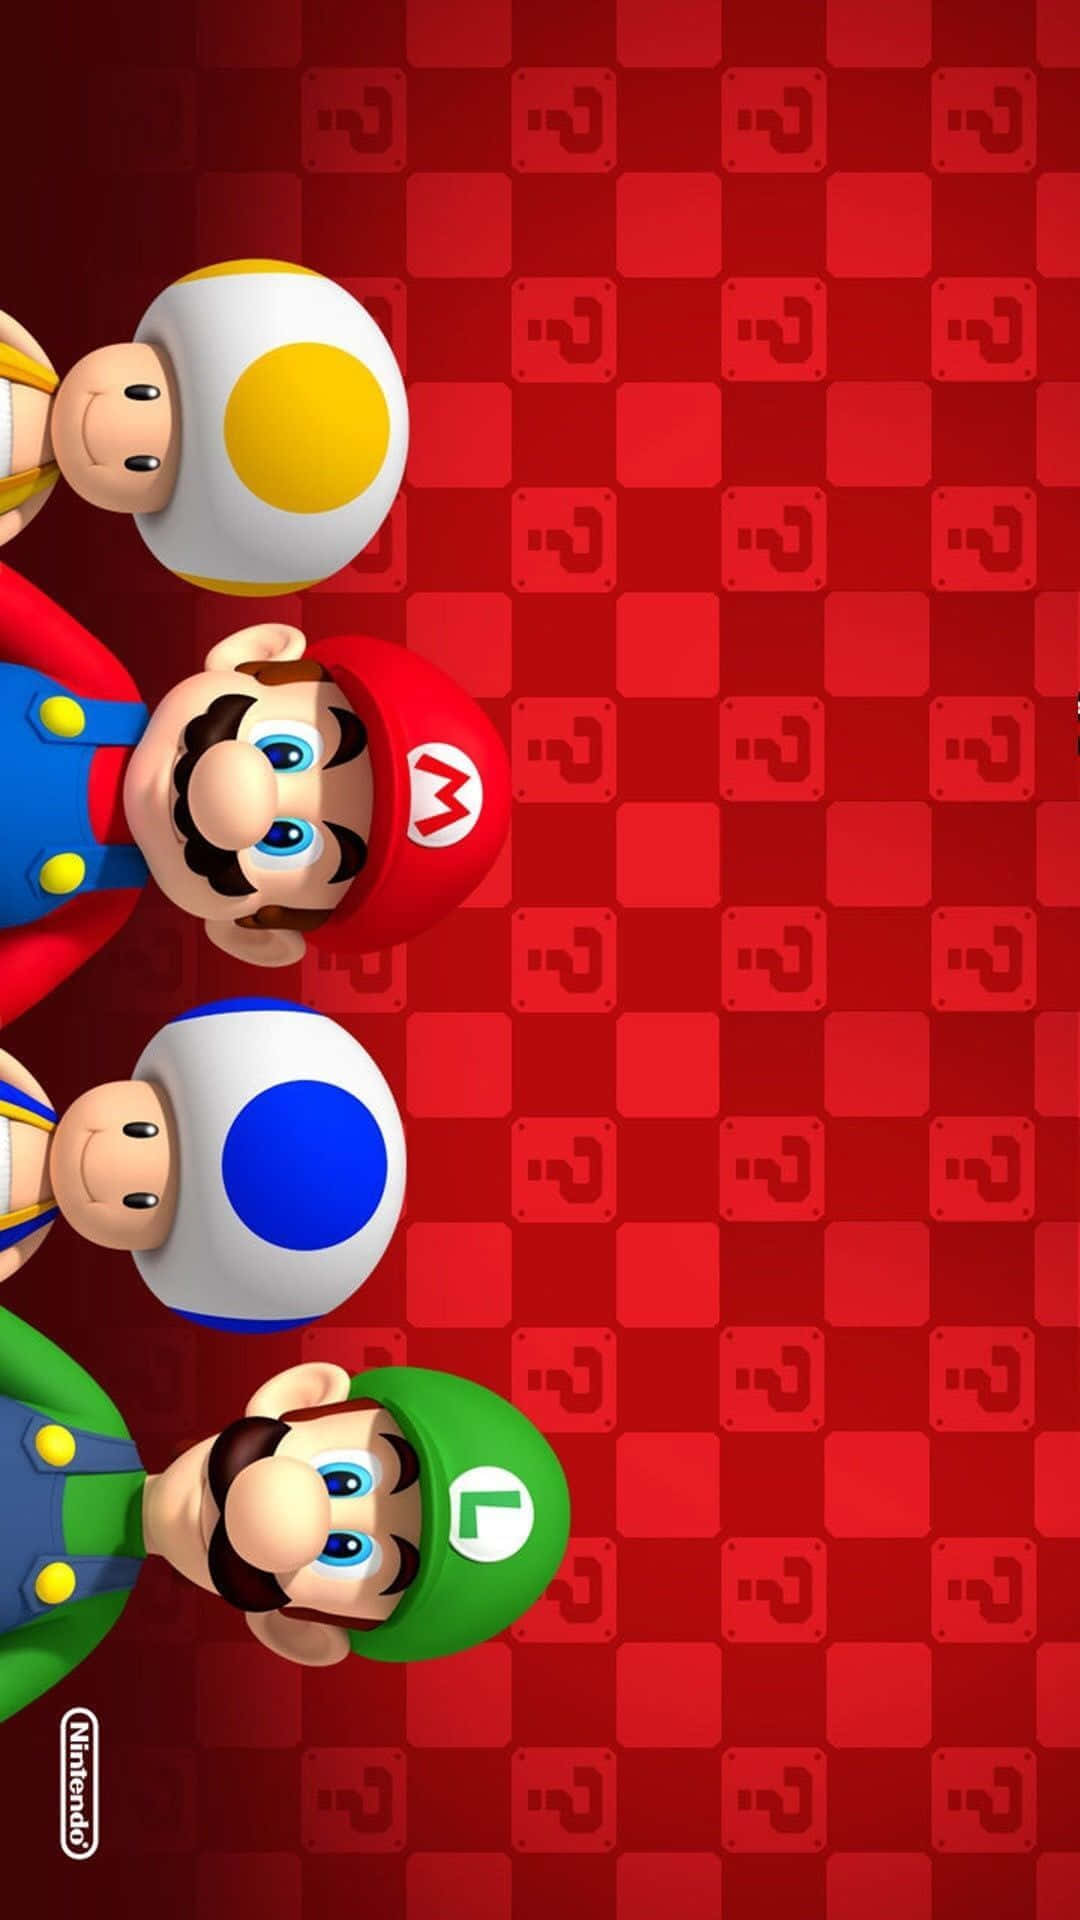 Stay connected to your favorite Nintendo gaming experiences on your iPhone Wallpaper